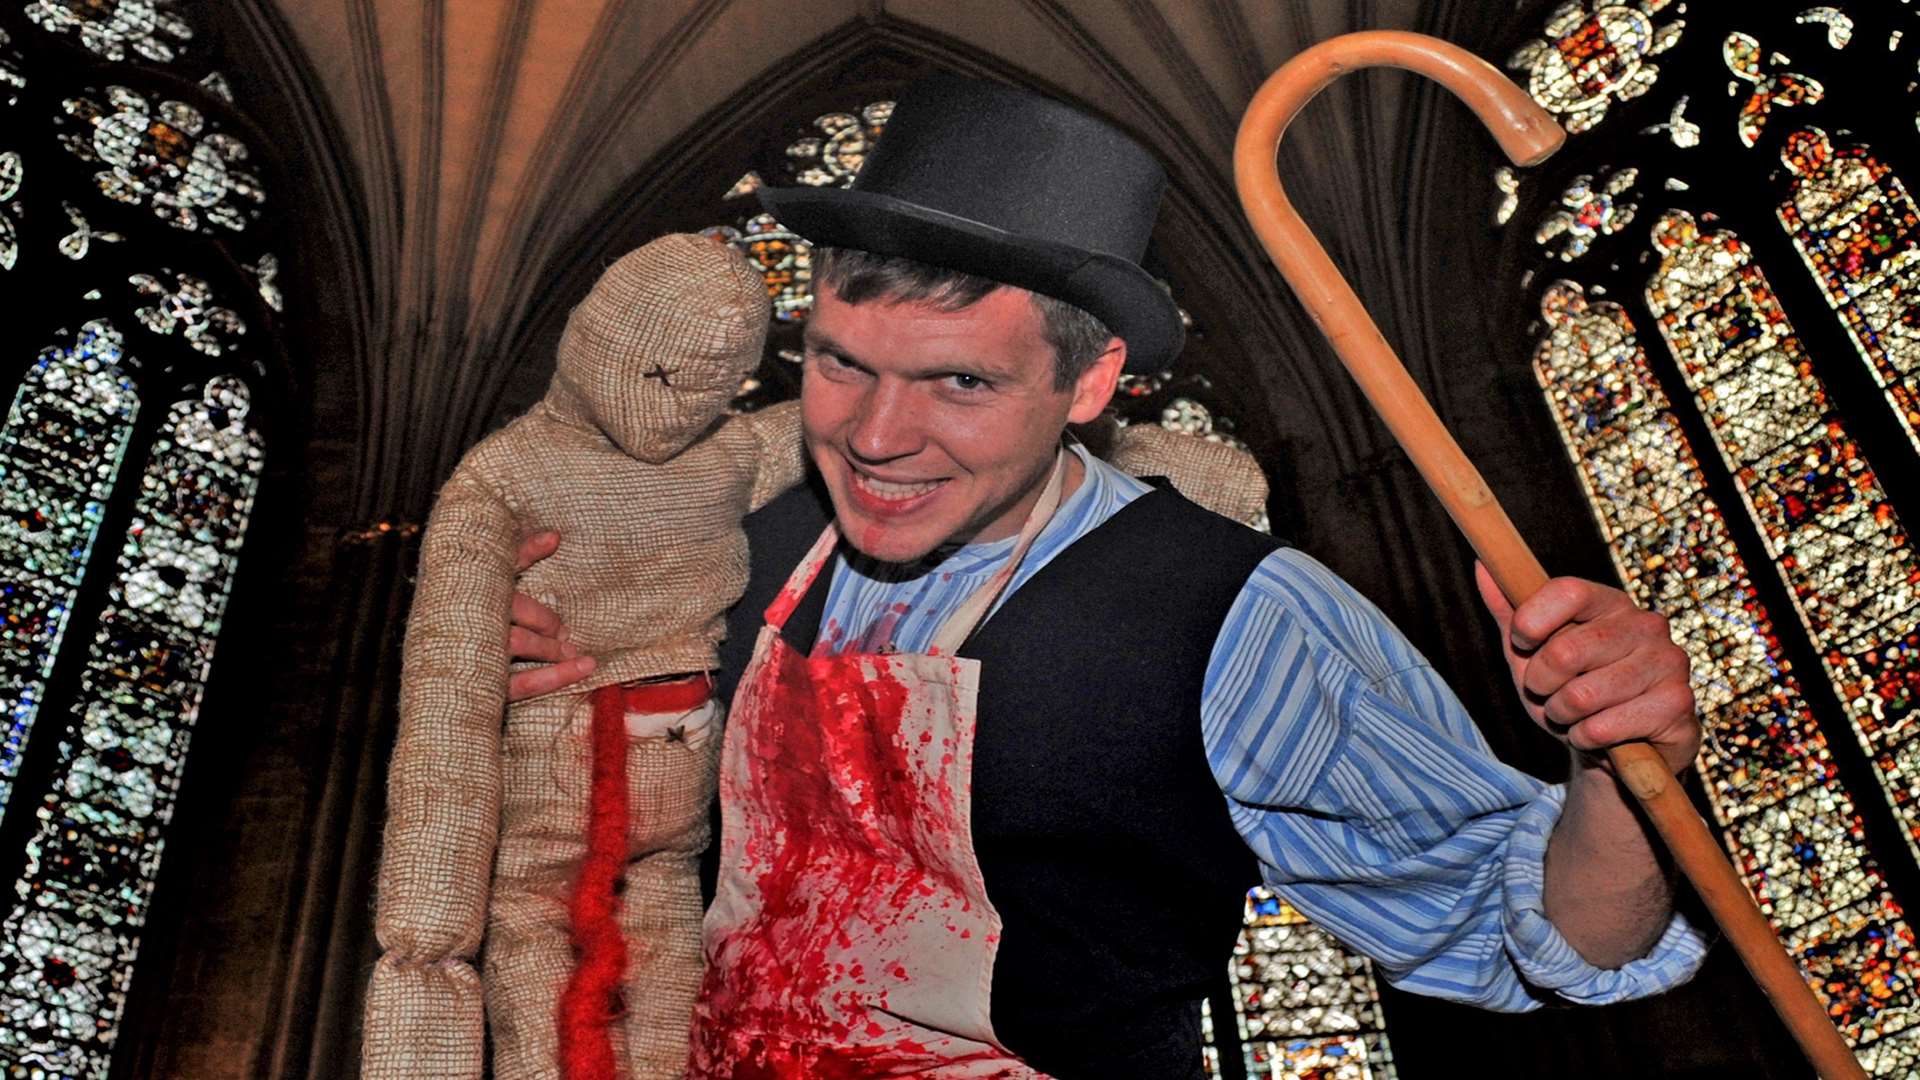 Doctor Death, coming to the Canterbury Festival